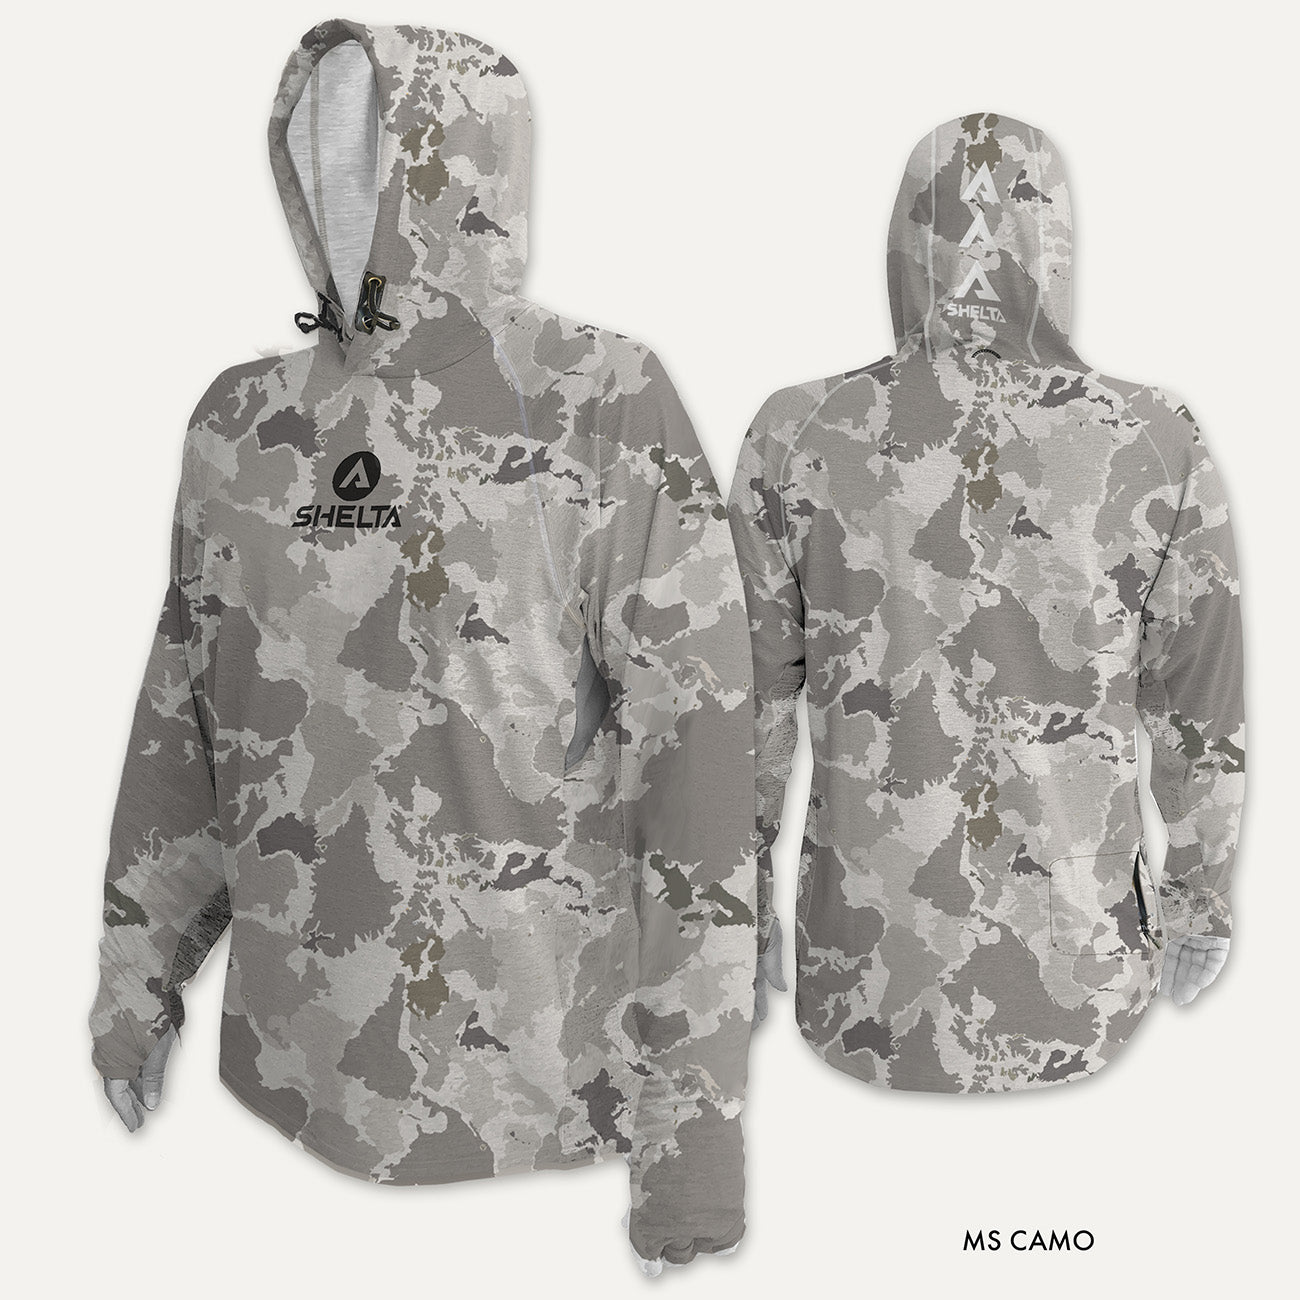 The Assault Hoodie in MS Camo is engineered & built with sun protection, function, and durability in mind. Offering features consistent with Shelta core values and innovation goals. UPF 50+ UV protection, the highest rating given. Blocks 98% of UVA/UVB radiation Loose comfort fit Moisture Wicking Sleeves with thumb hole & finger loop for multiple hand protection options